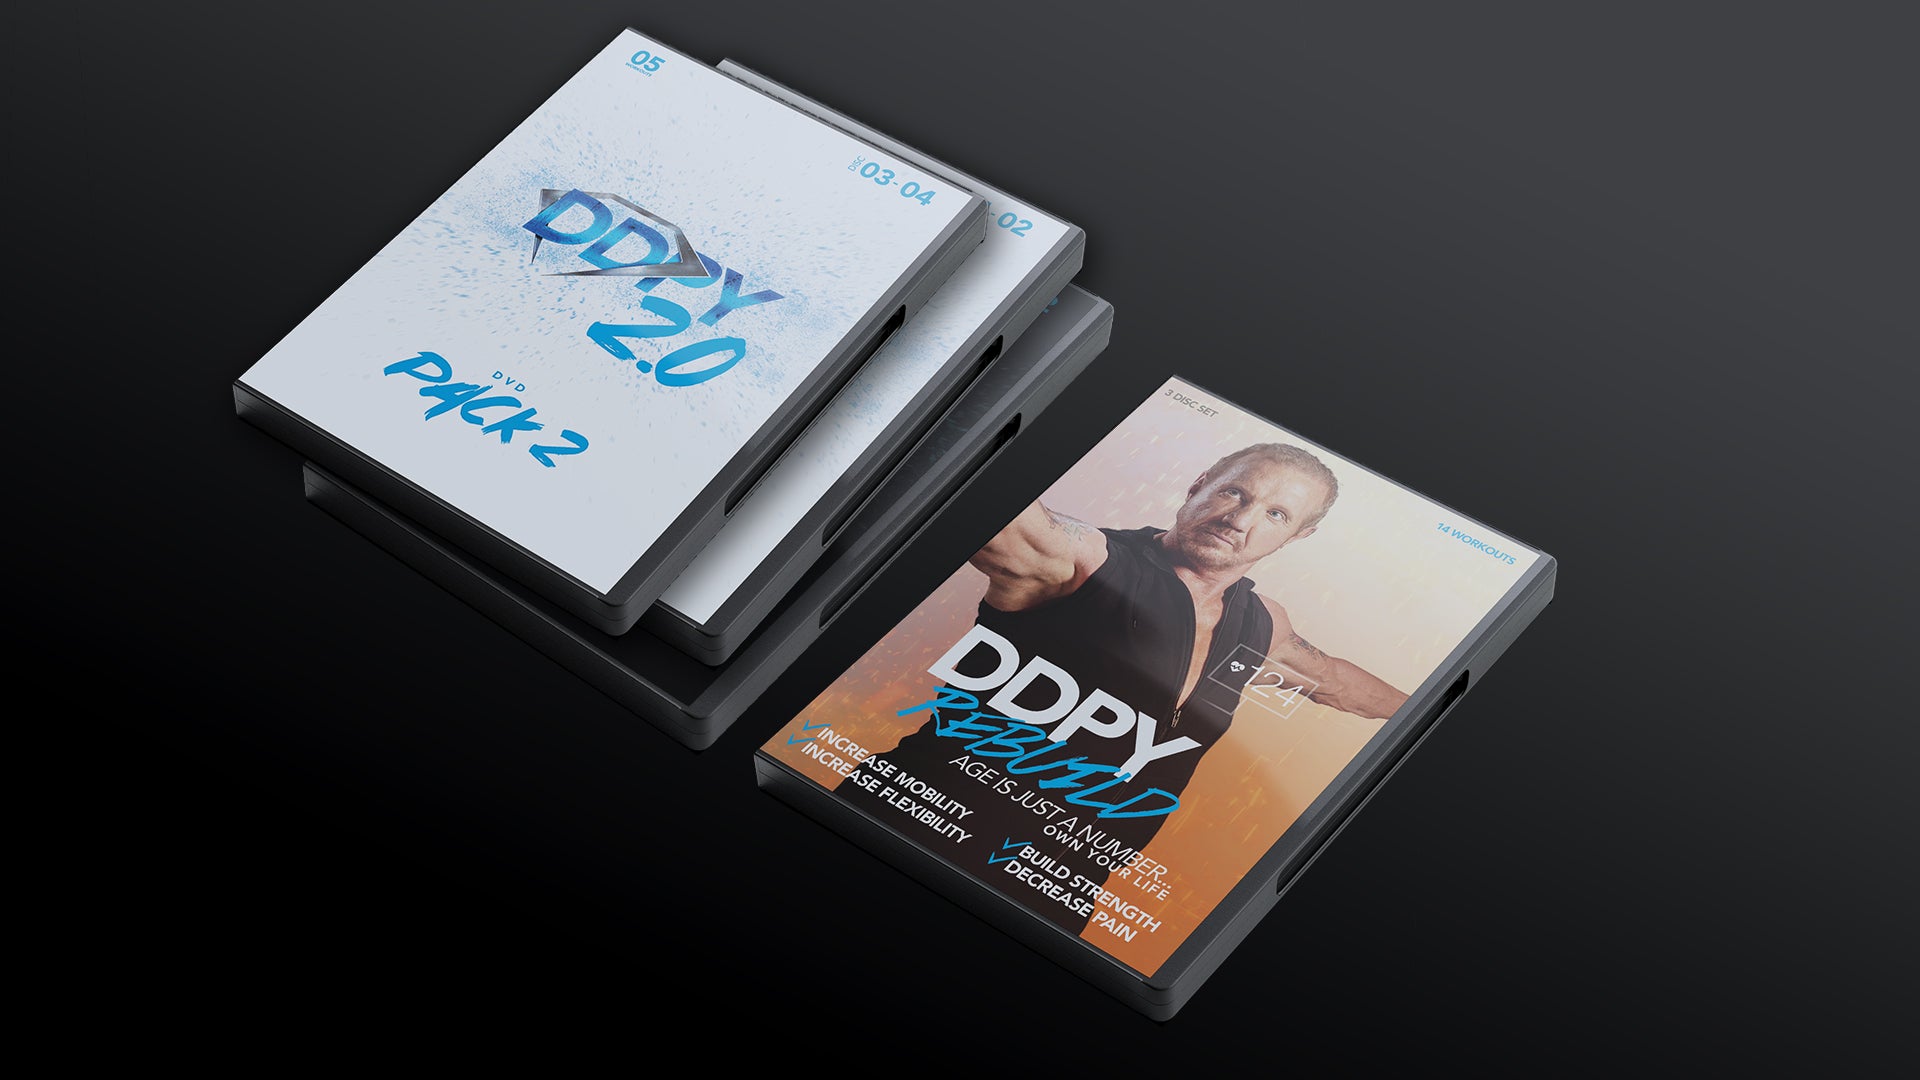 ddp dvd products for sale